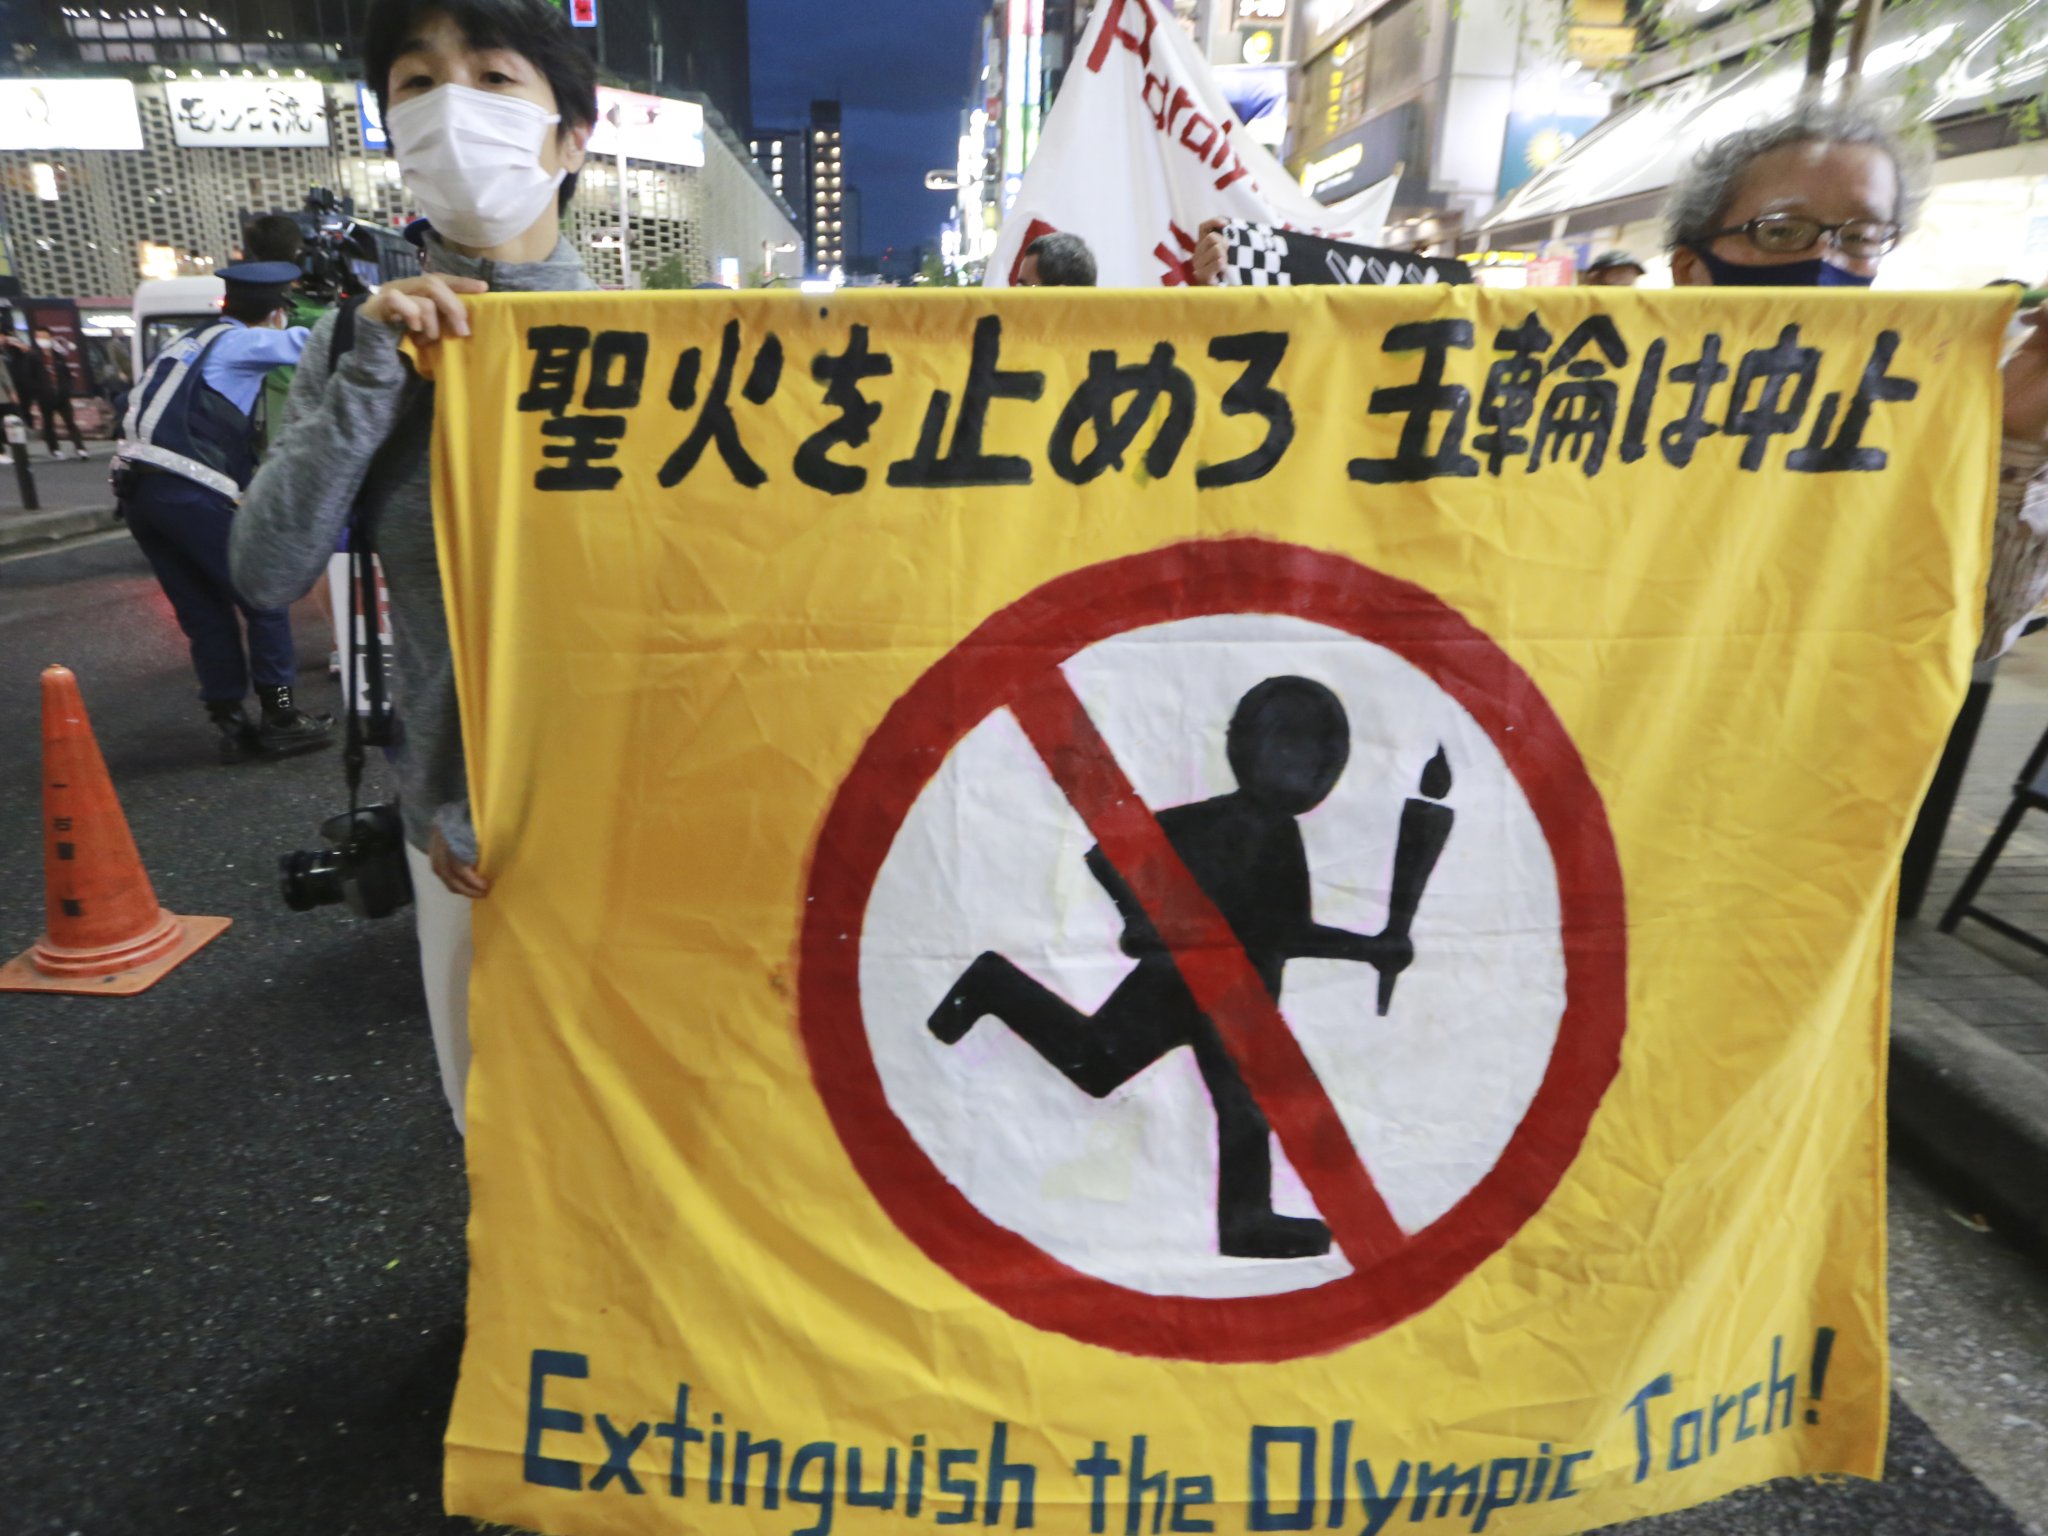 Japan Just Extended Its 3rd State Of Emergency Weeks Before The Olympics Begin